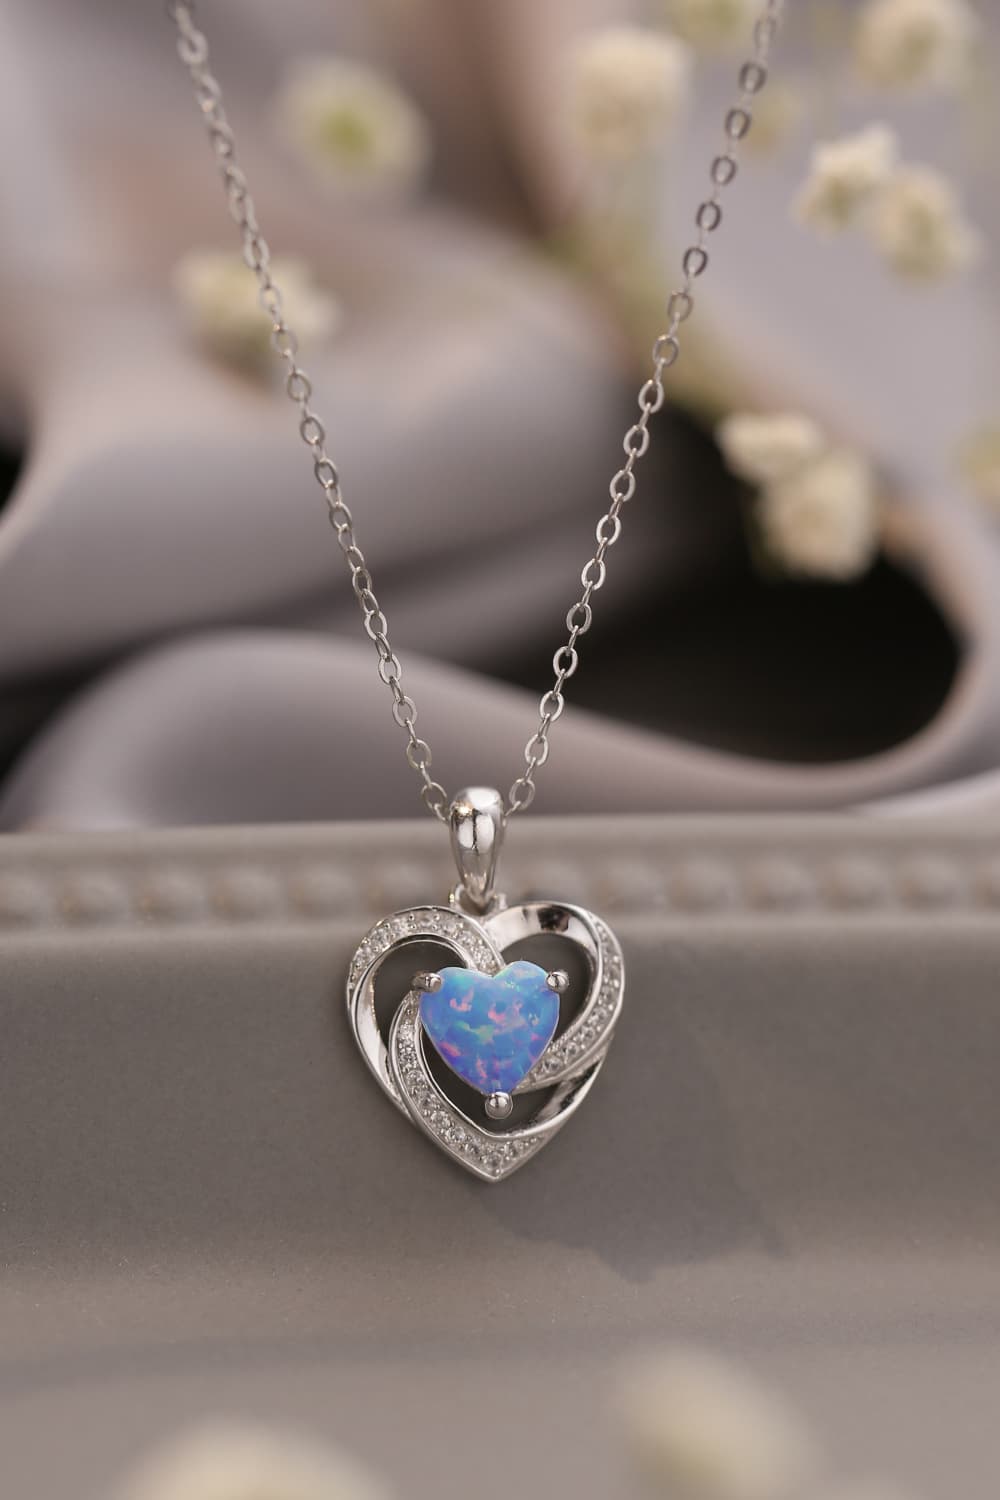 Opal Heart Pendant Necklace - Dazzle with the Romance of Nature's Treasures - Elevate Your Style and Captivate Hearts - Guy Christopher